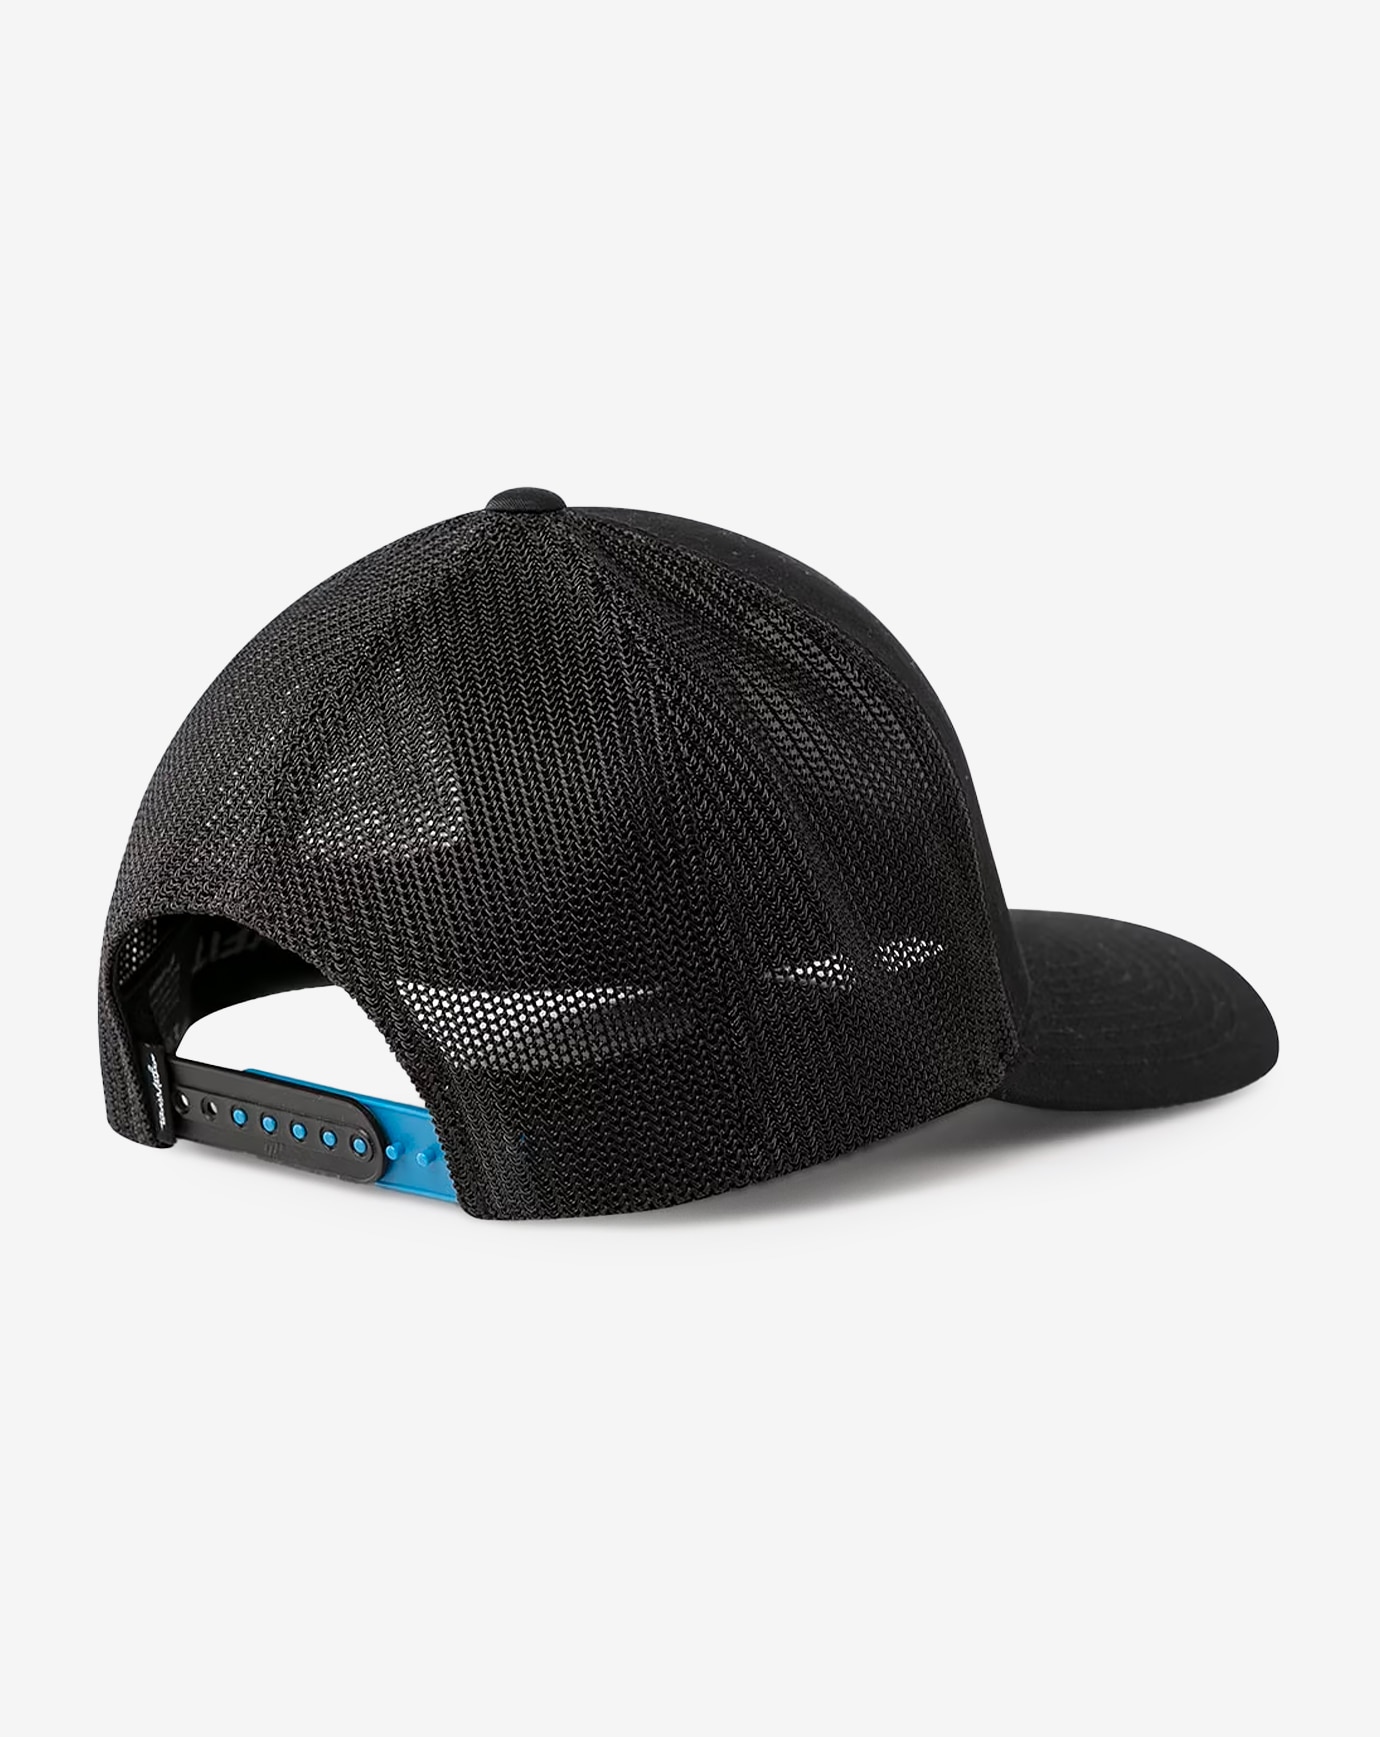 THE PATCH SNAPBACK HAT Image Thumbnail 3